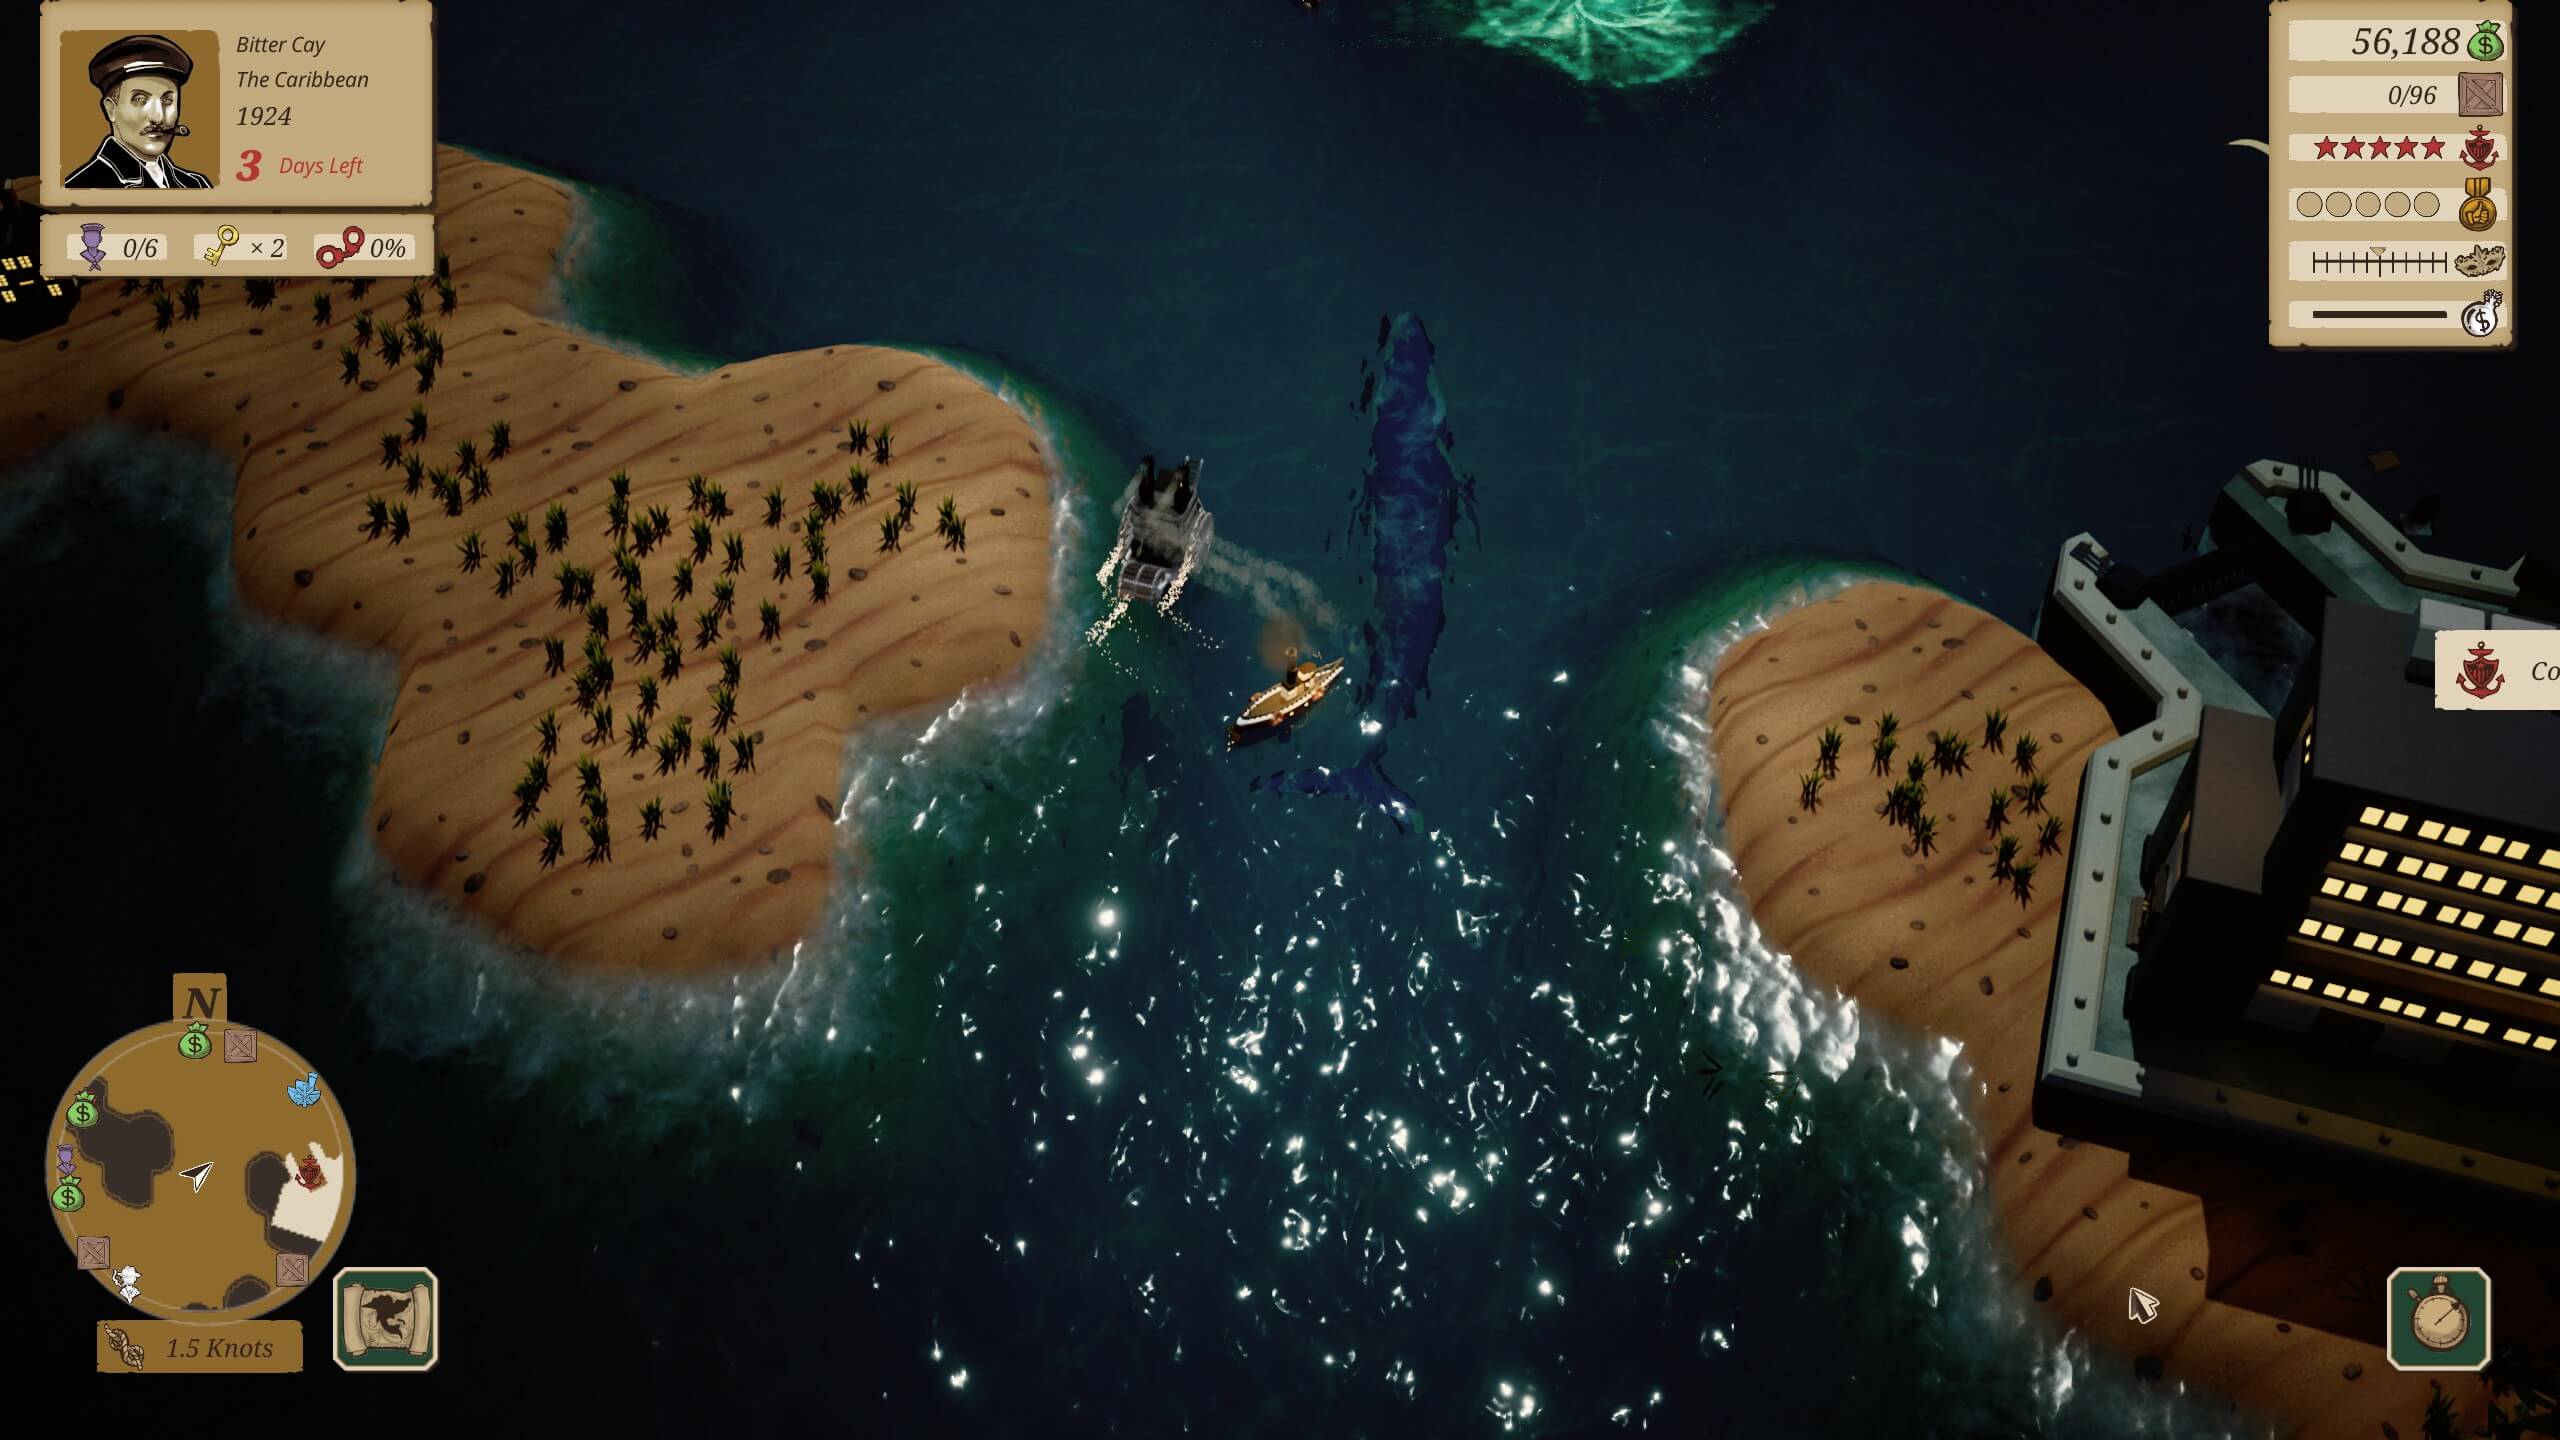 a game screen showing the whale under the water. there are two ships as well, one the user controller ship and the other an AI ship. land masses are either side of the ships